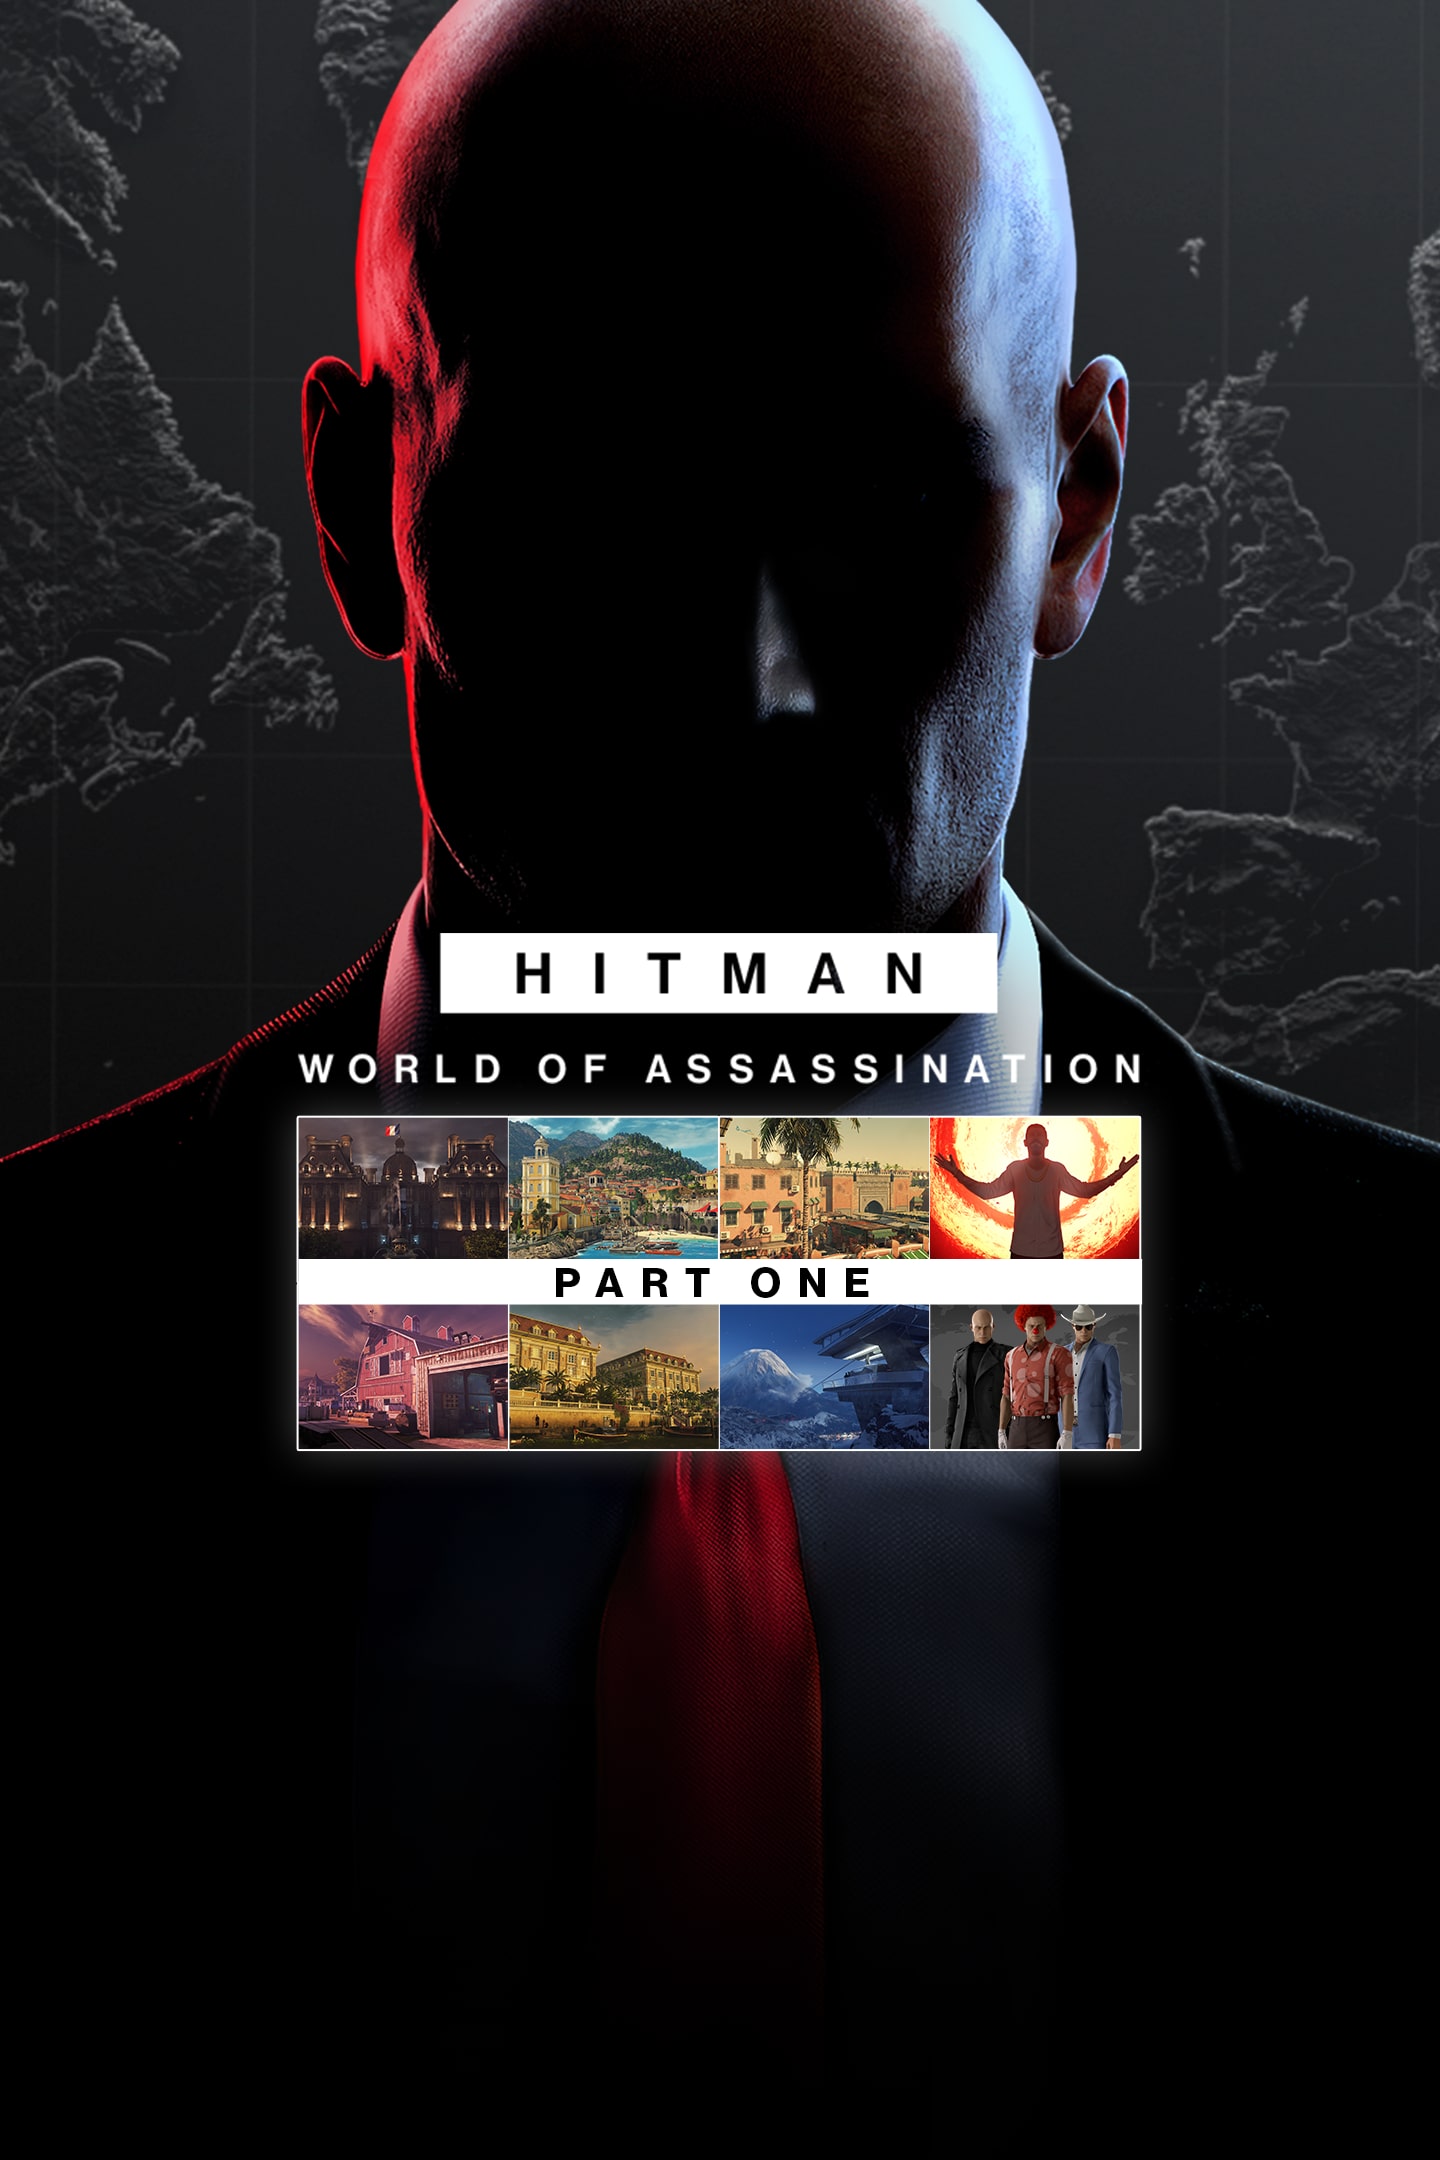 Hitman 3 - Free Starter Pack Trophy Guide and PSN Price History